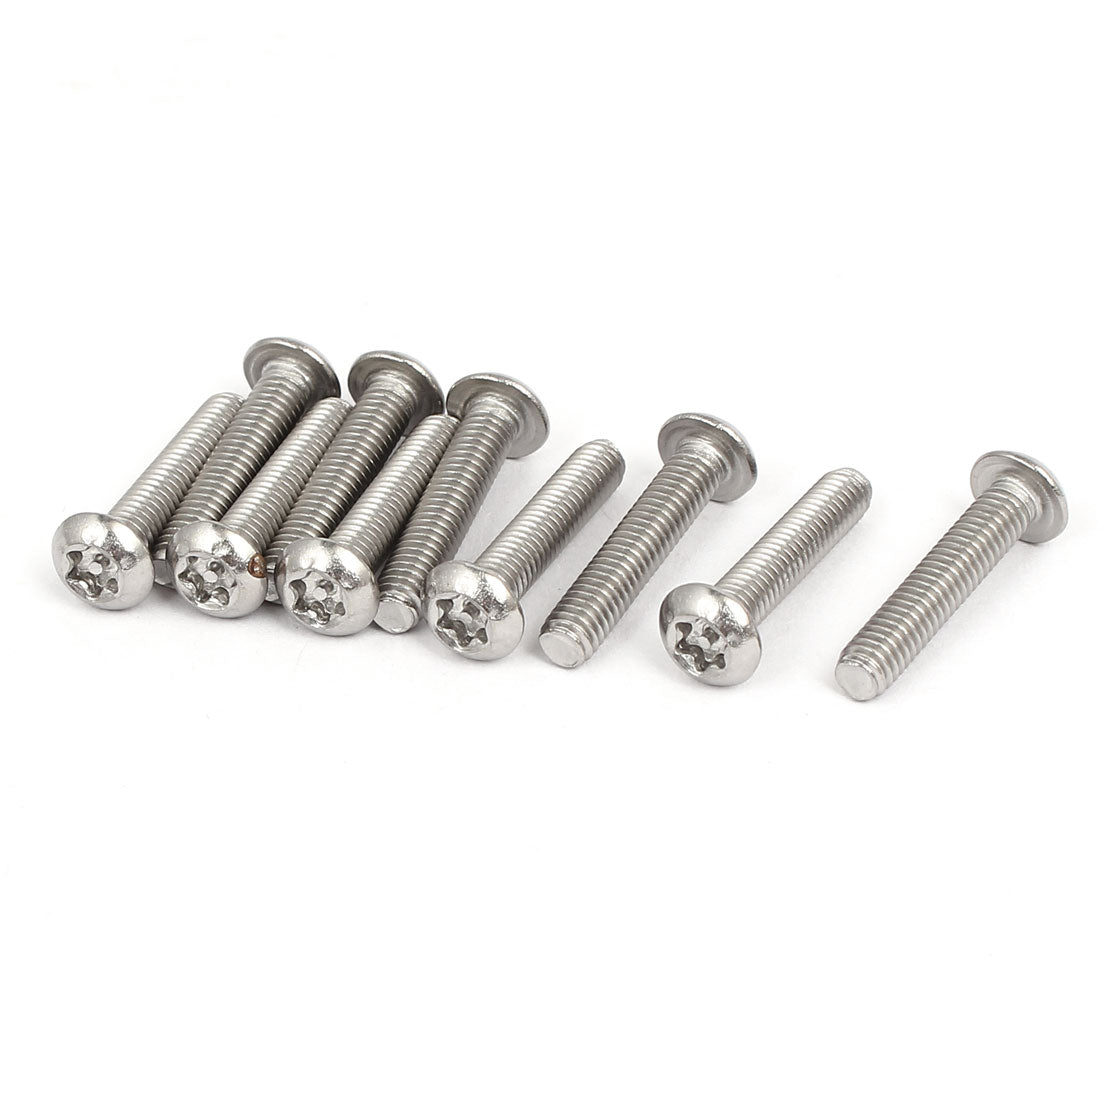 uxcell Uxcell M4x20mm 304 Stainless Steel Button Head Torx Tamper Resistant Screws 10pcs